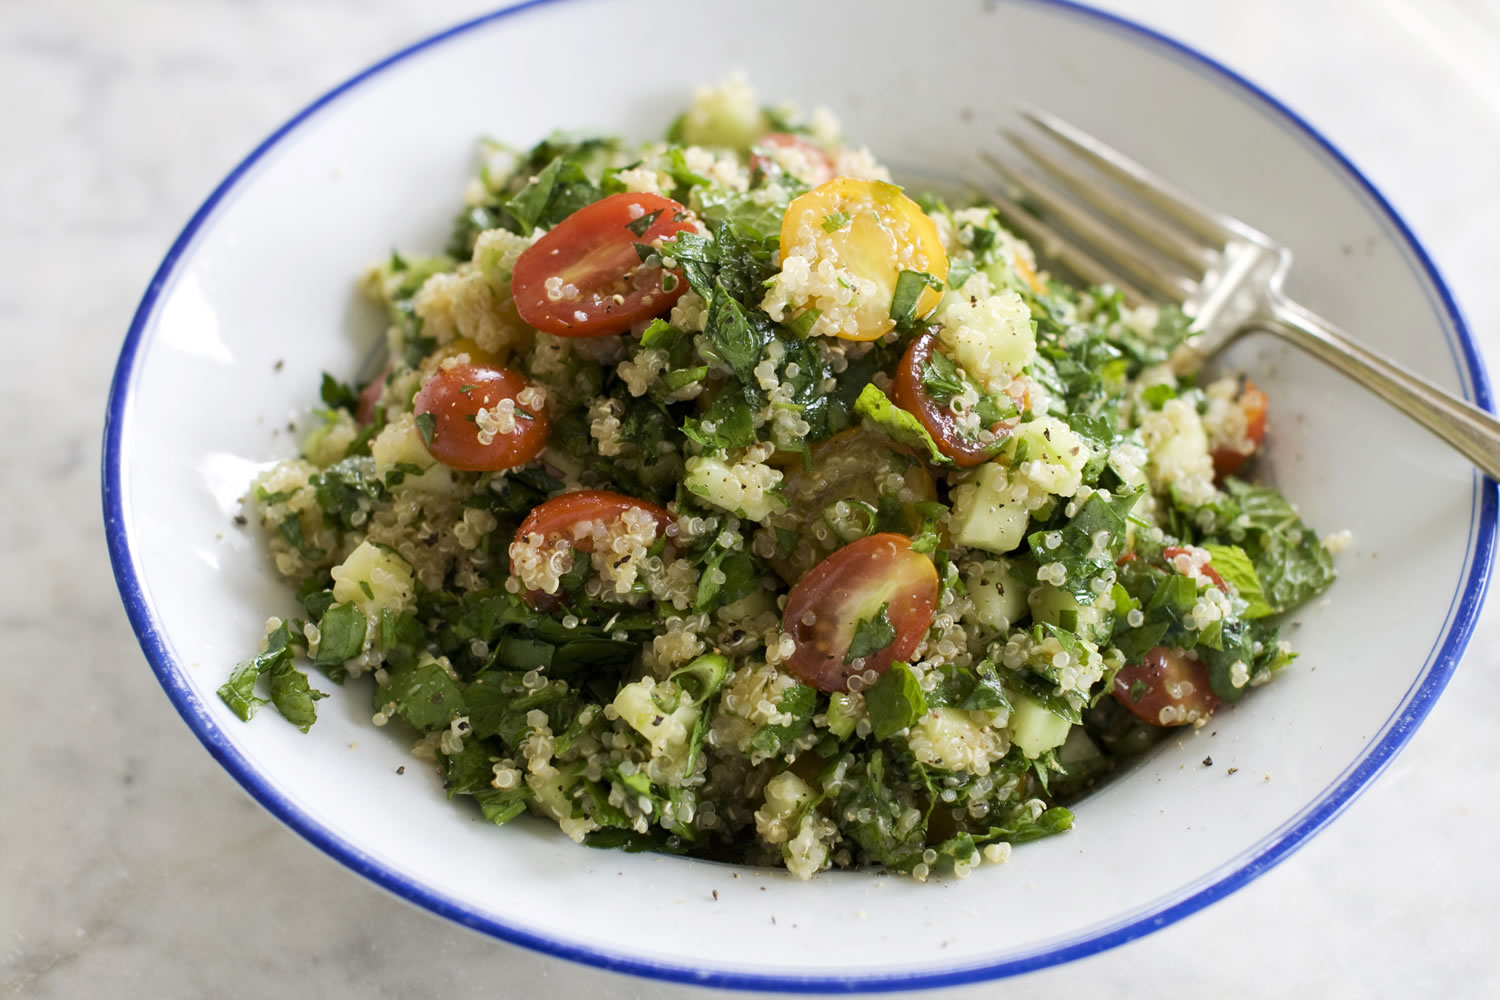 Quinoa adds tons of protein and calcium to tabbouleh, a delicious Middle Eastern salad.